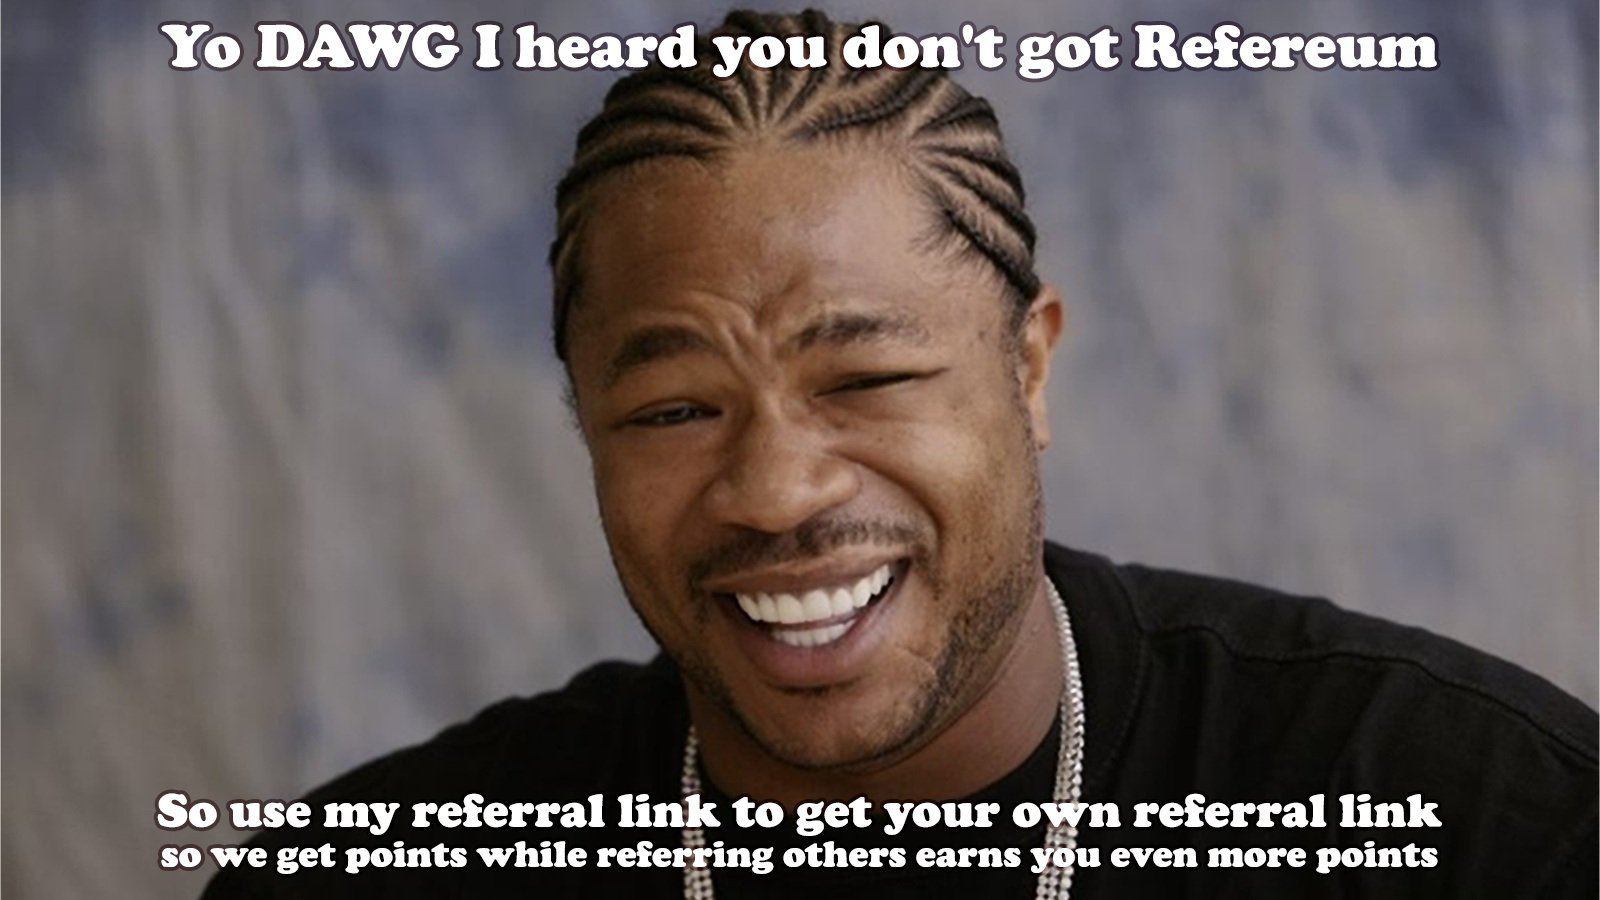 Refereum On Twitter AND THEN We Put Your Refereum Referral